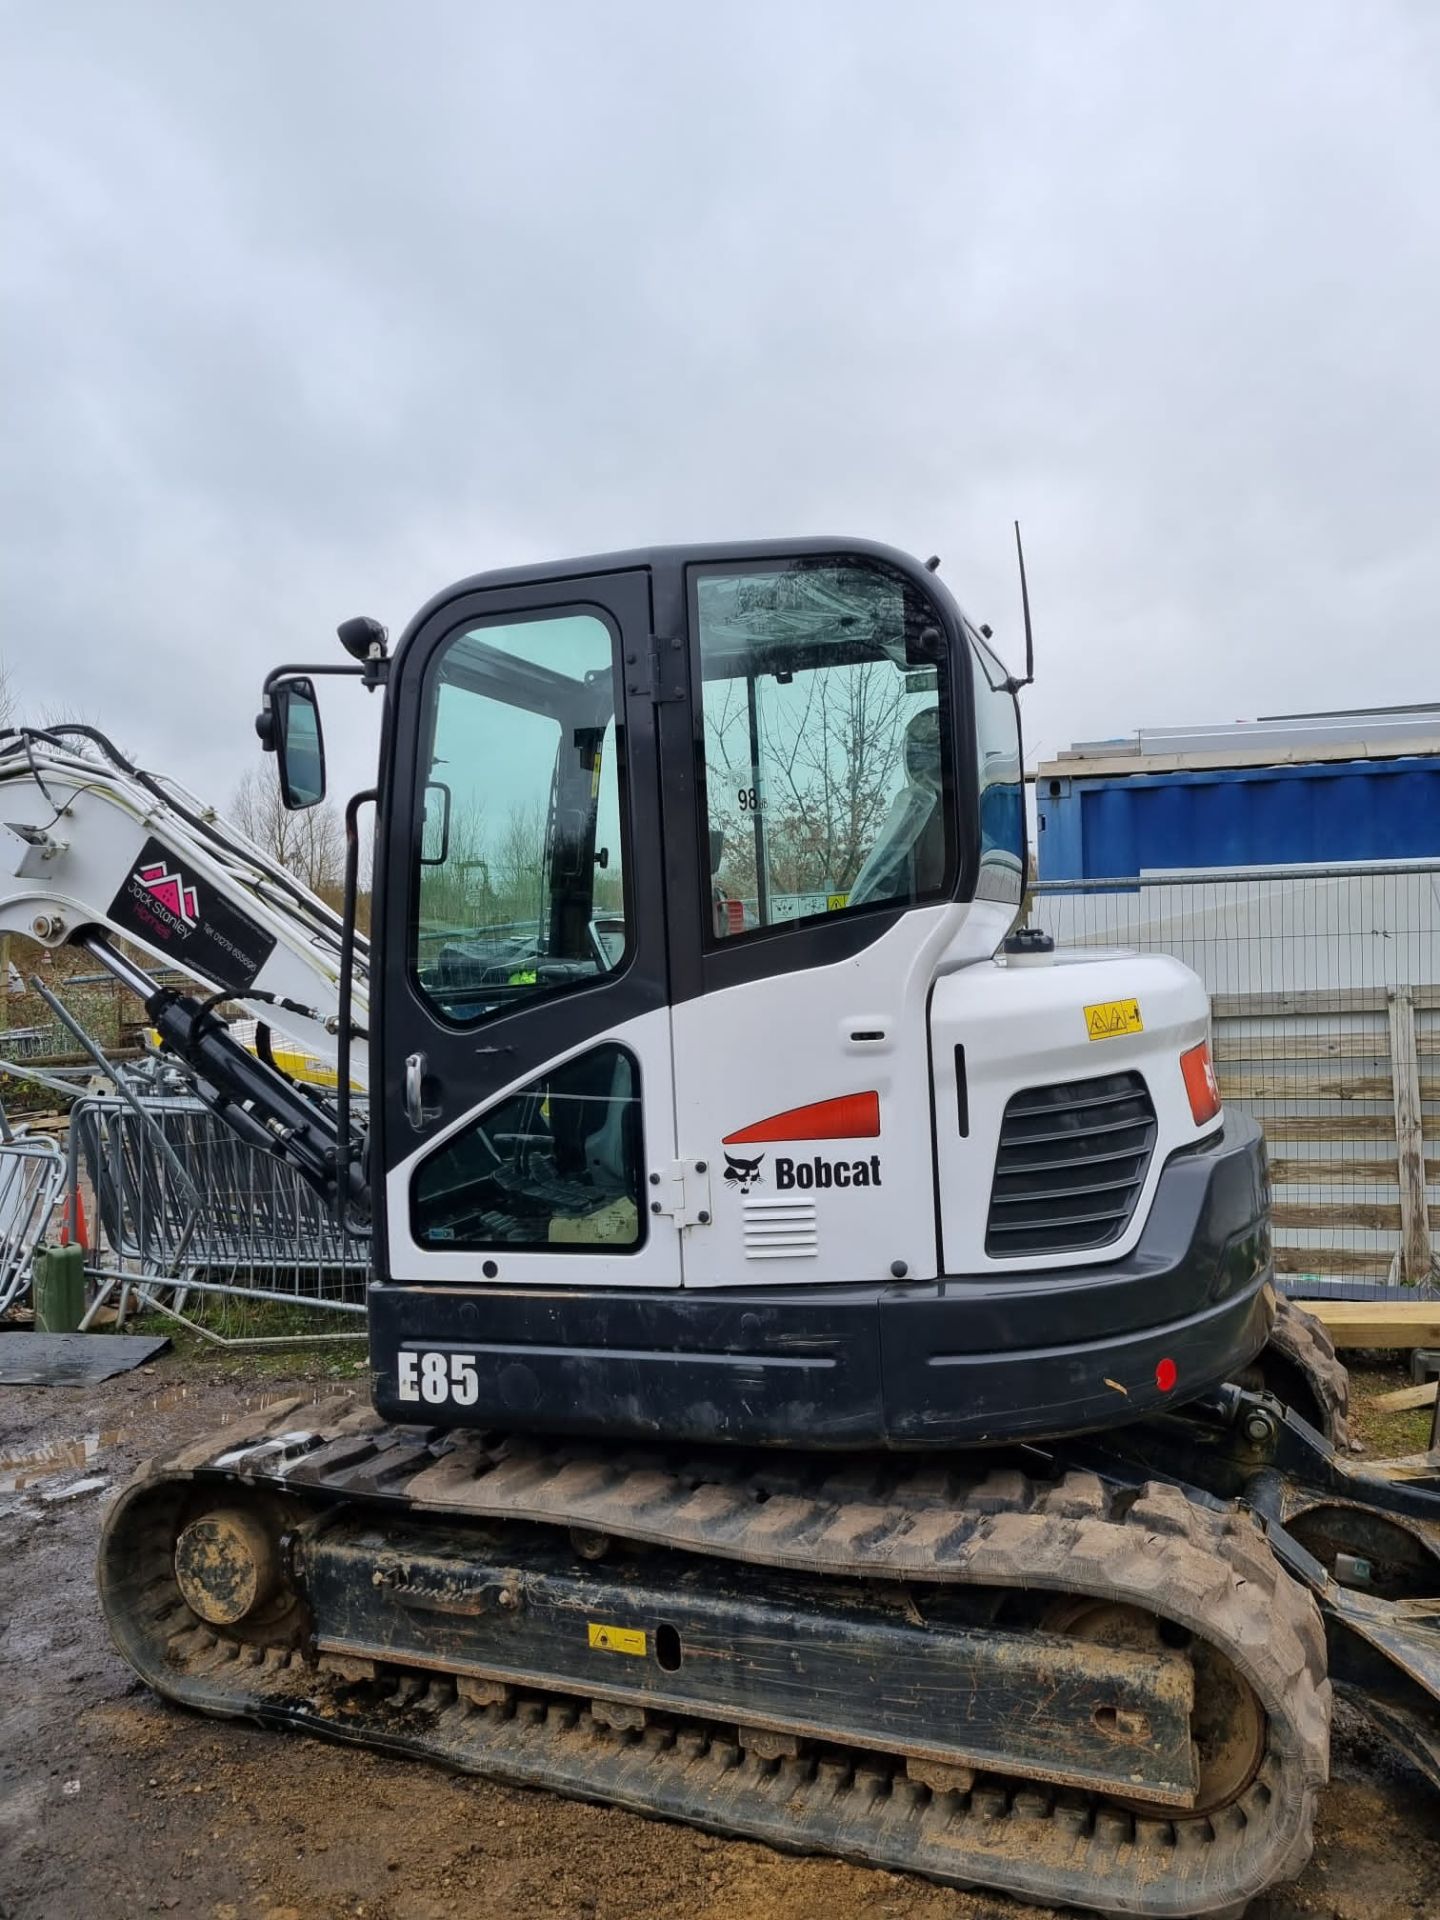 BOBCAT E85 RUBBER TRACKED EXCAVATOR YEAR 2018 BUILD, 395 REC HOURS. OWNED BY VENDOR FROM NEW. PURCHA